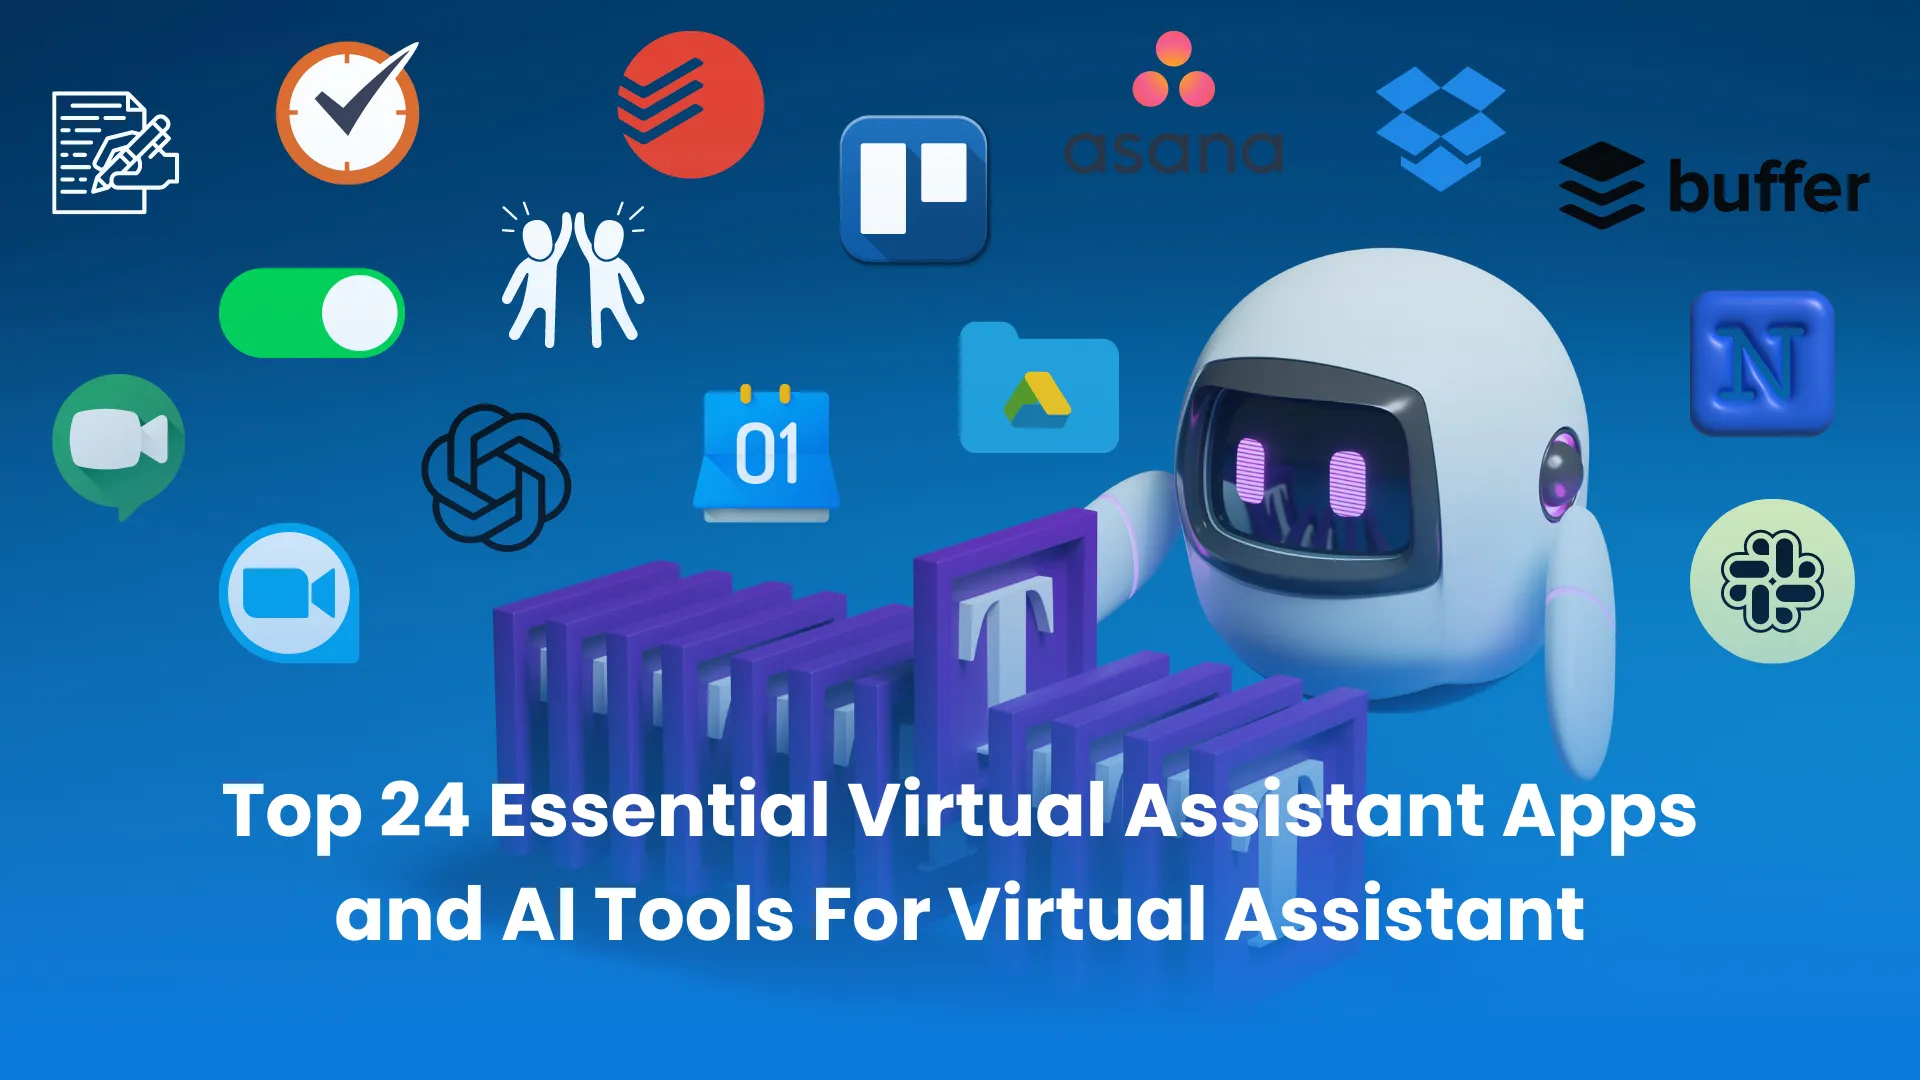 Top 24 Essential Virtual Assistant Apps and AI Tools For Virtual Assistant